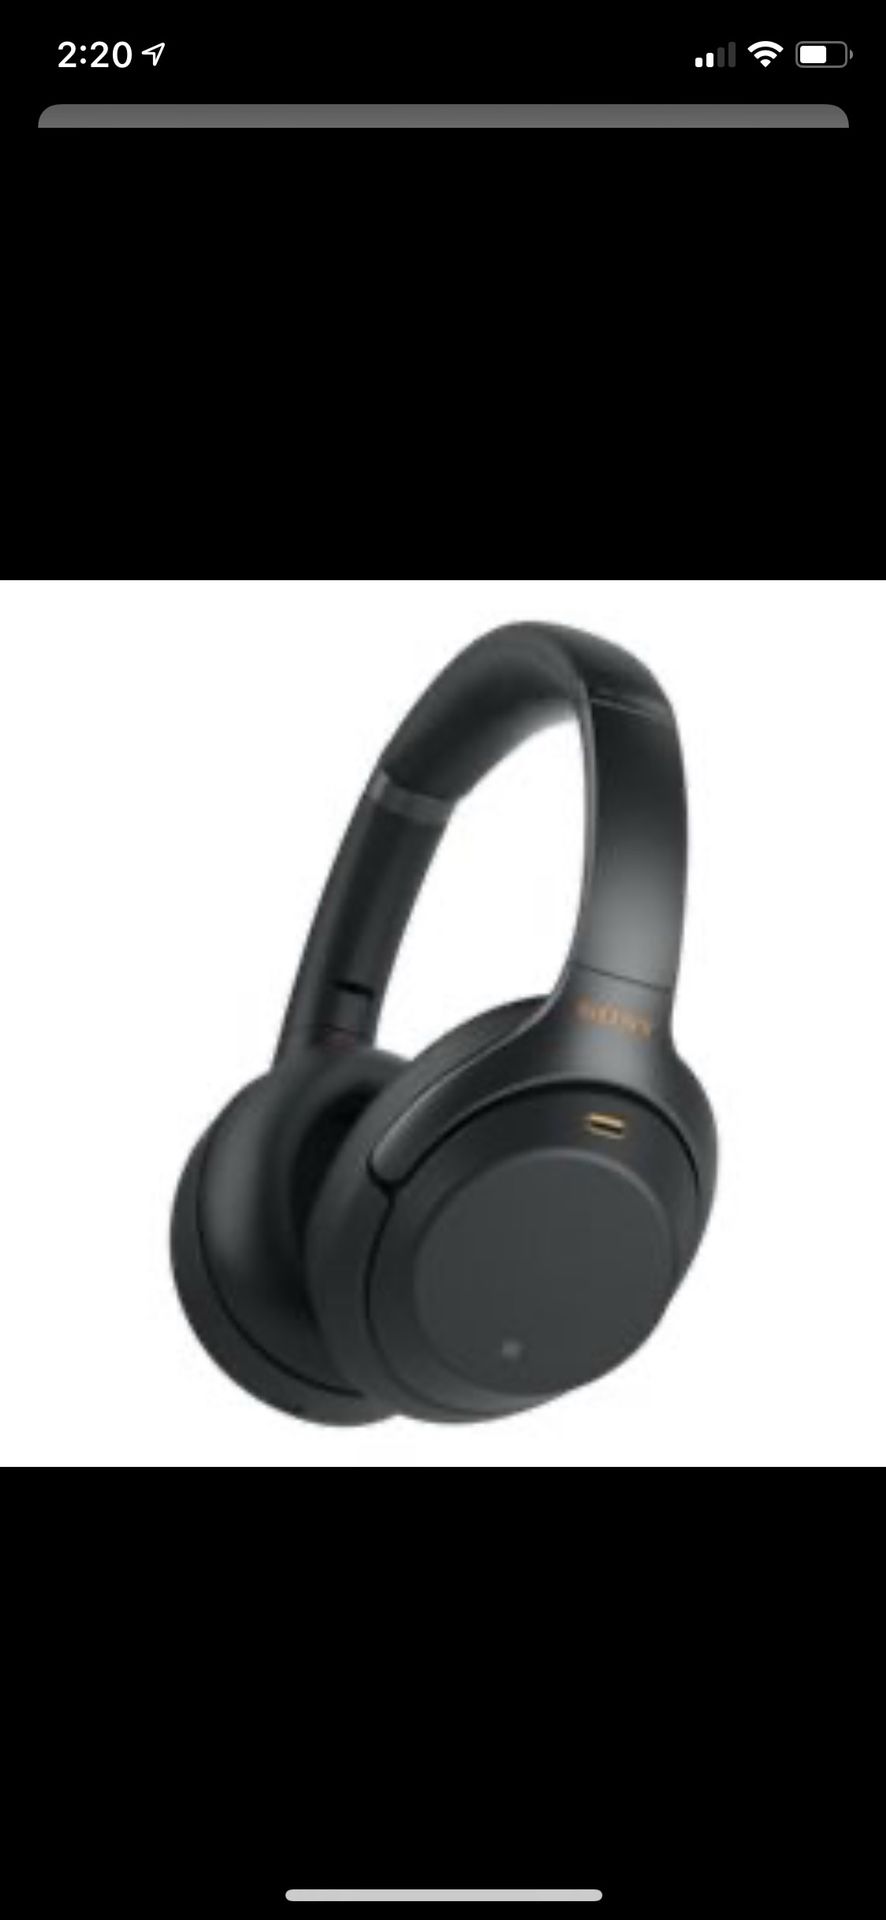 Sony WH-1000X M3 Wireless Noise Cancelling Headphones